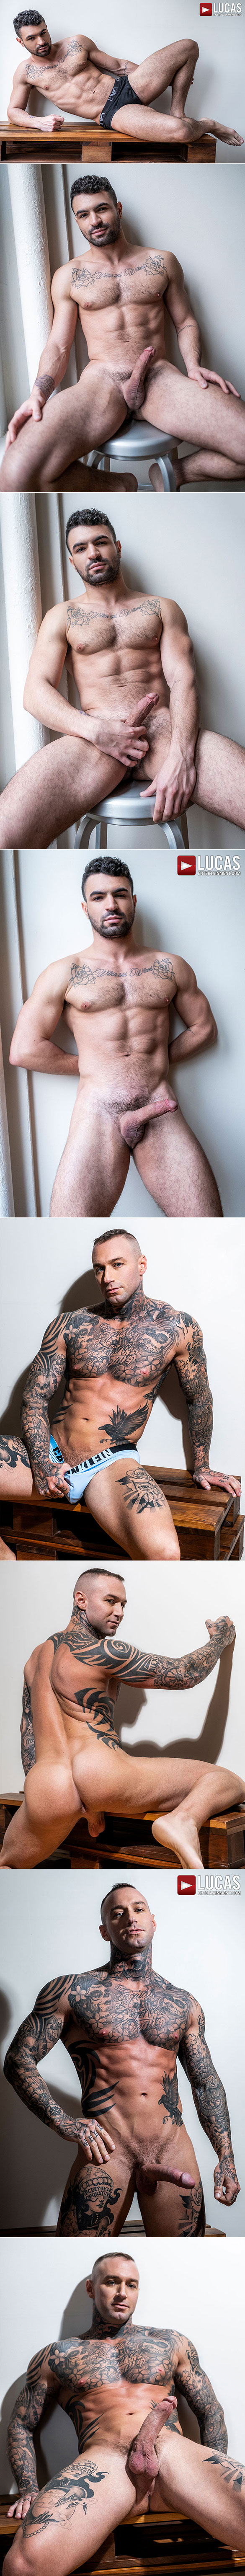 Lucas Entertainment: Dylan James pounds Ian Greene bareback in "Bred from Behind"